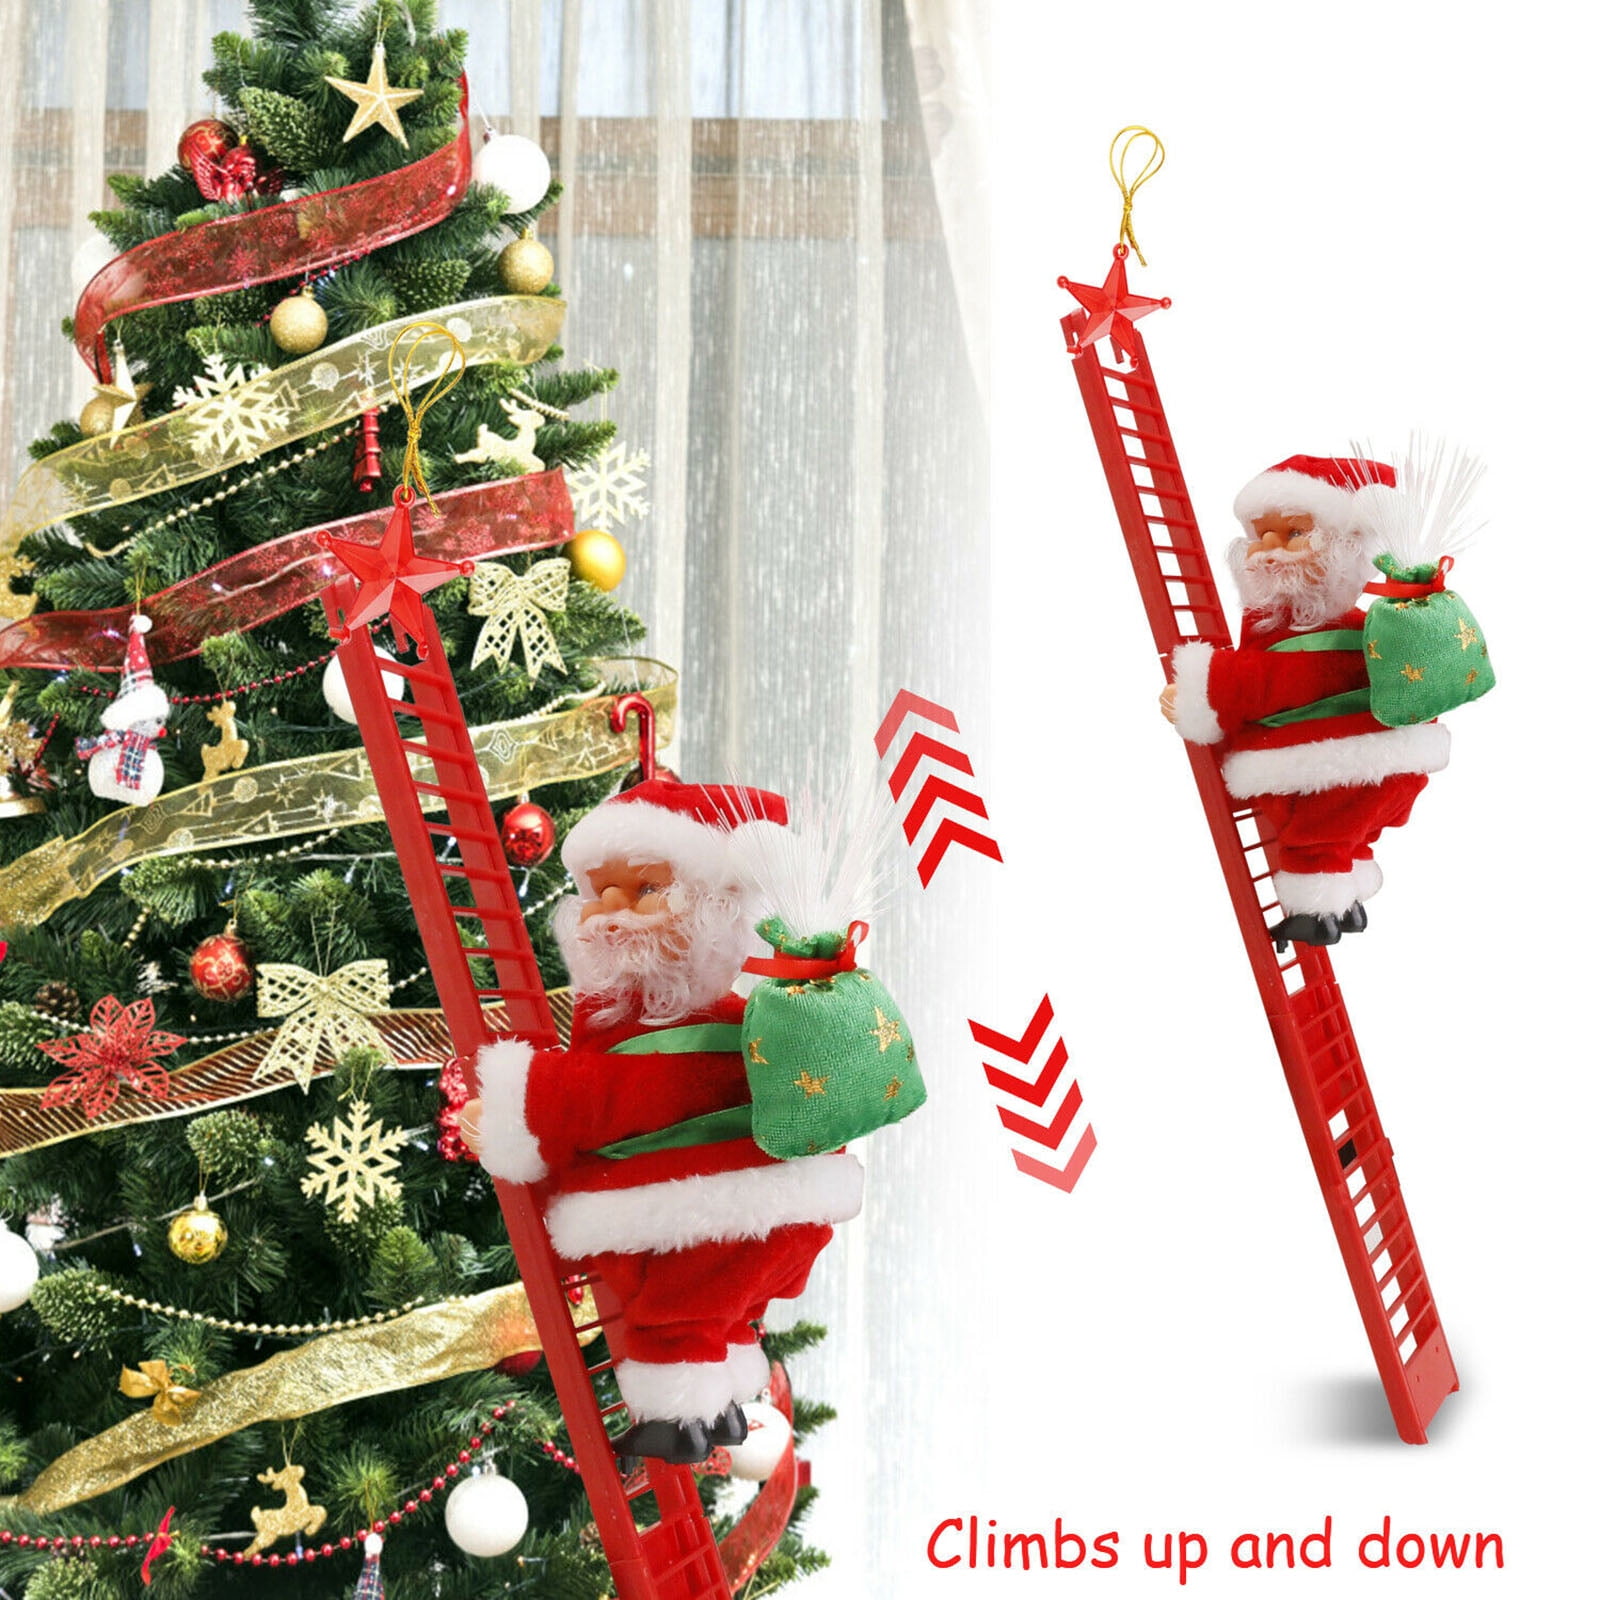 Animated Electric Climbing Ladder Santa Claus Doll Party Musical Christmas Decor 